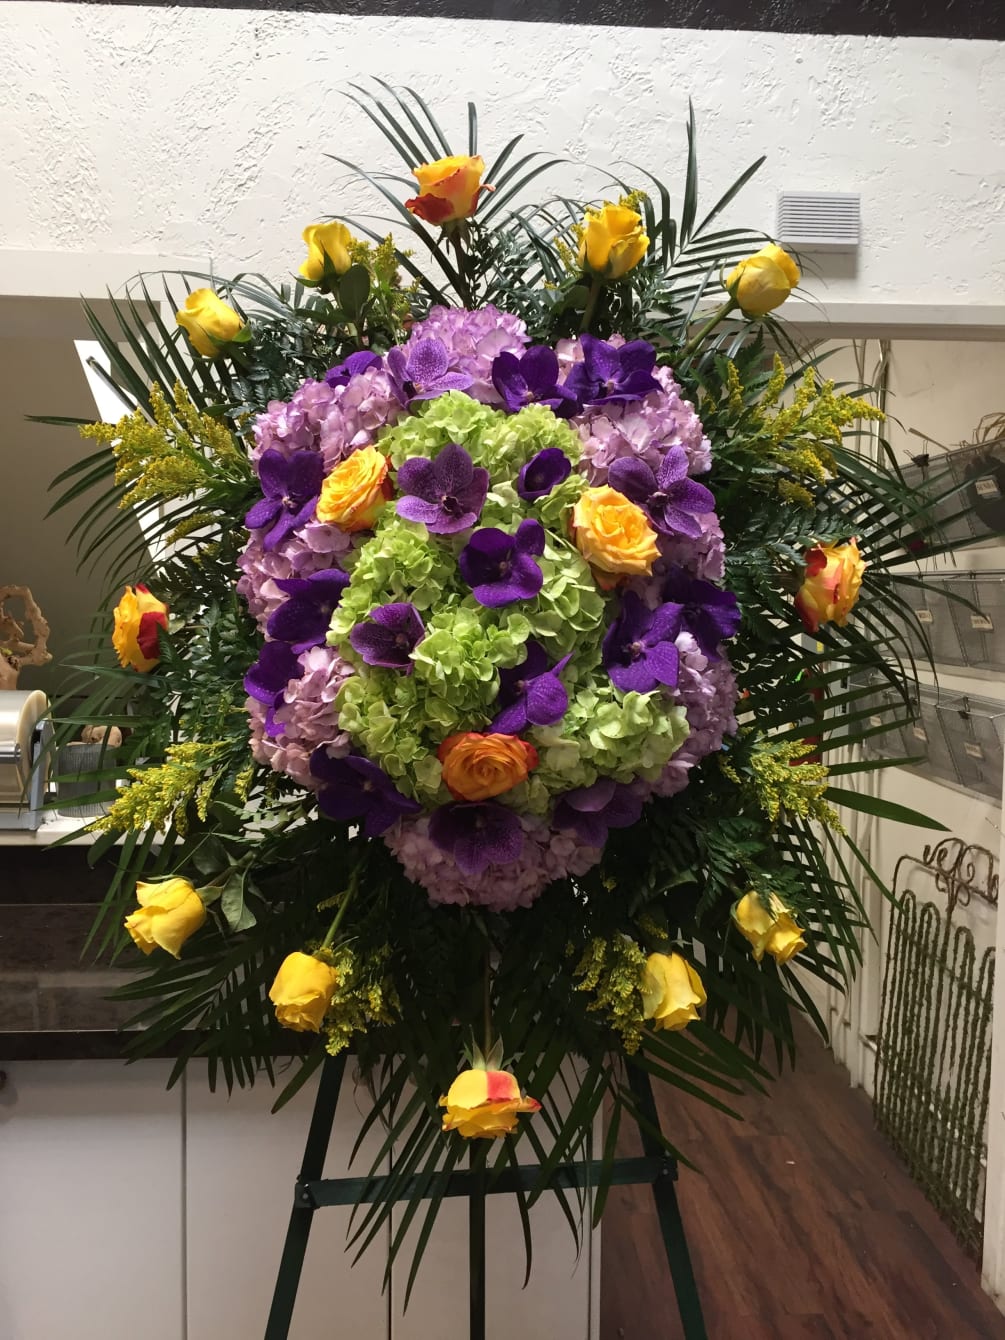 An exquisite spray completed with purple hydrangeas, yellow roses, and purple vanda